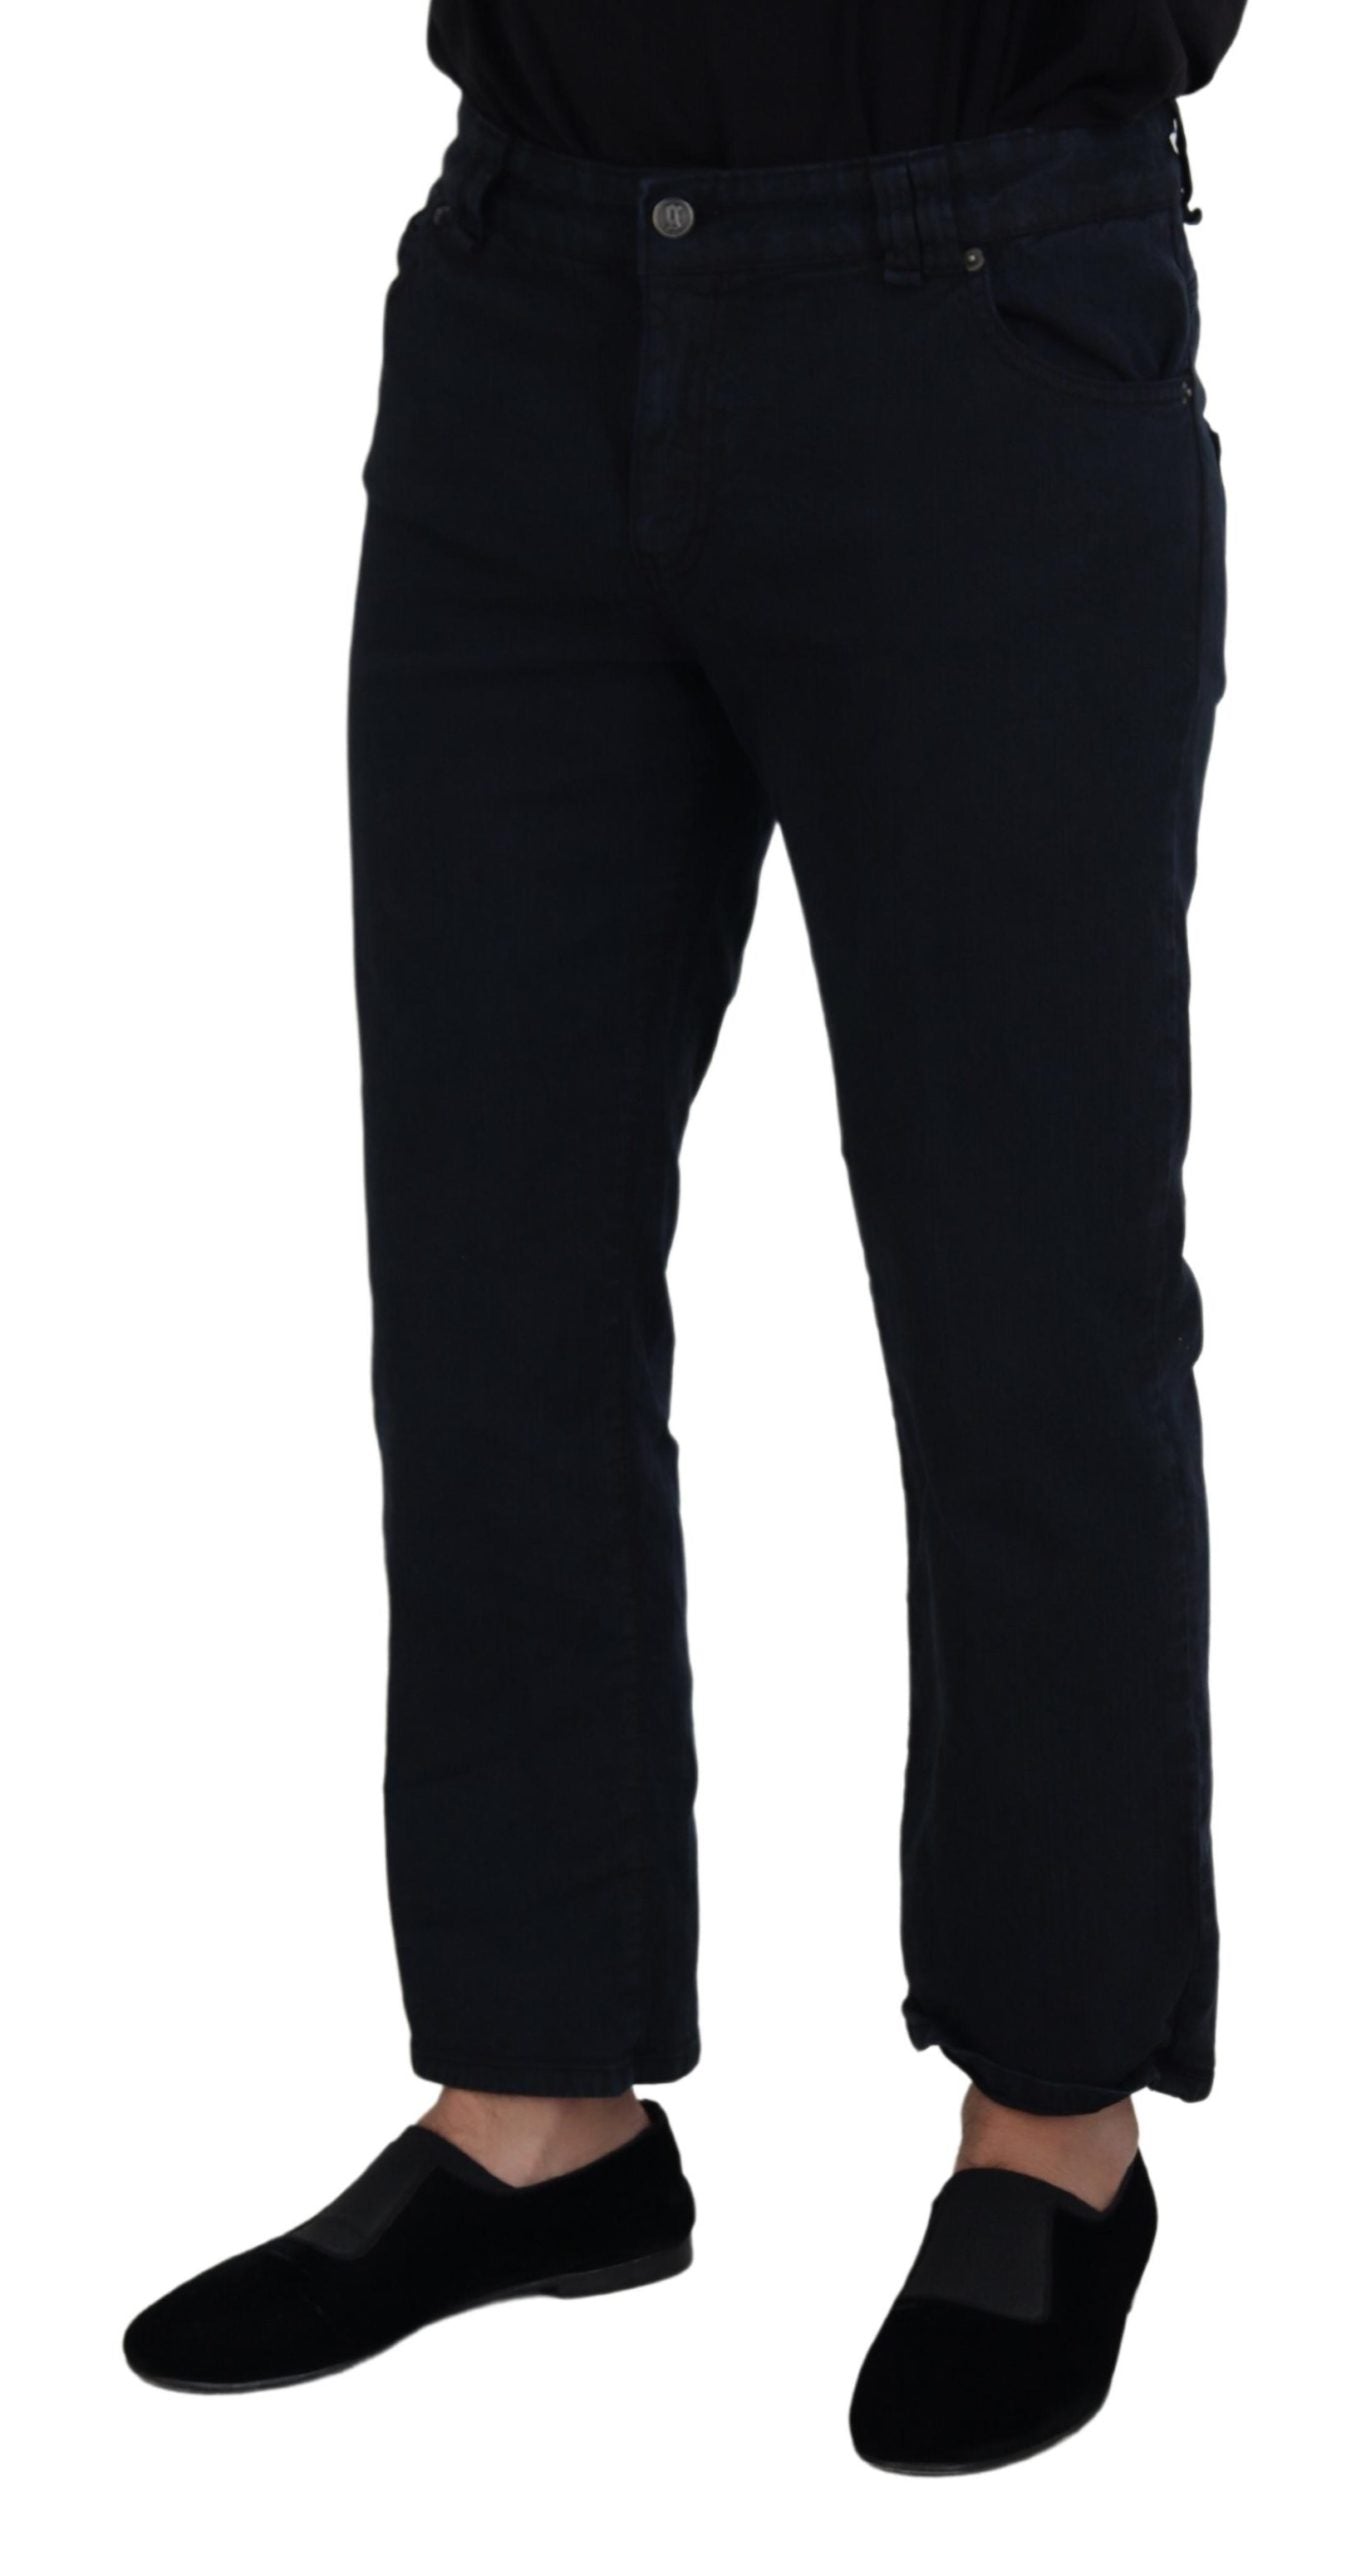 John Galliano Men's Black Cotton Back Buckle Casual Denim Jeans - Designed by John Galliano Available to Buy at a Discounted Price on Moon Behind The Hill Online Designer Discount Store